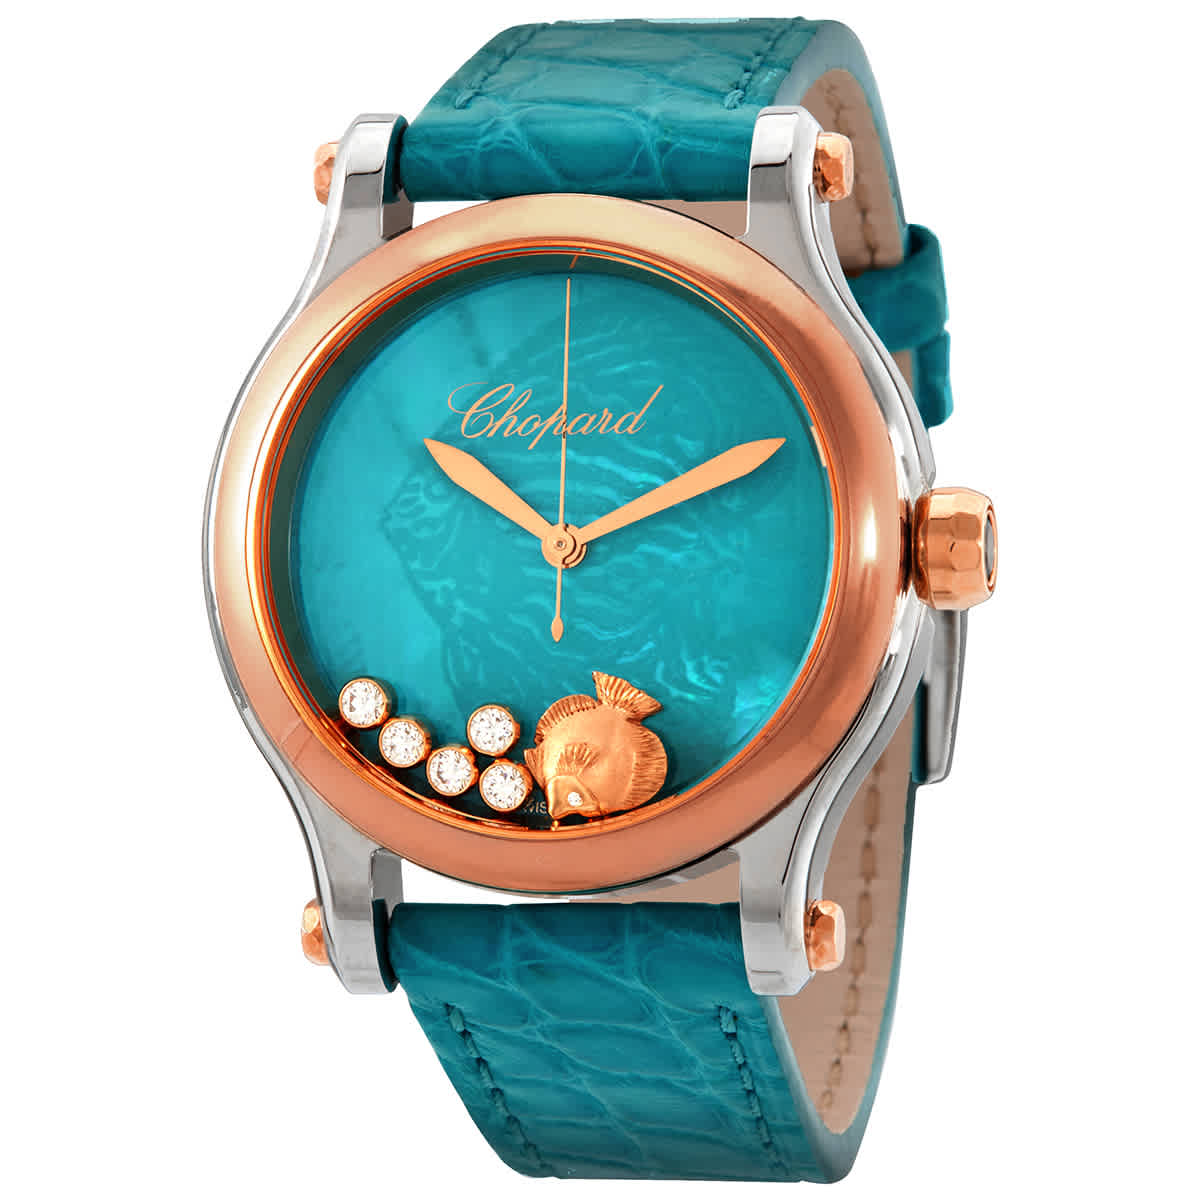 Chopard Happy Fish Automatic Blue Mother Of Pearl Dial Ladies Watch 278578-6001 In Blue,gold Tone,green,mother Of Pearl,pink,rose Gold Tone